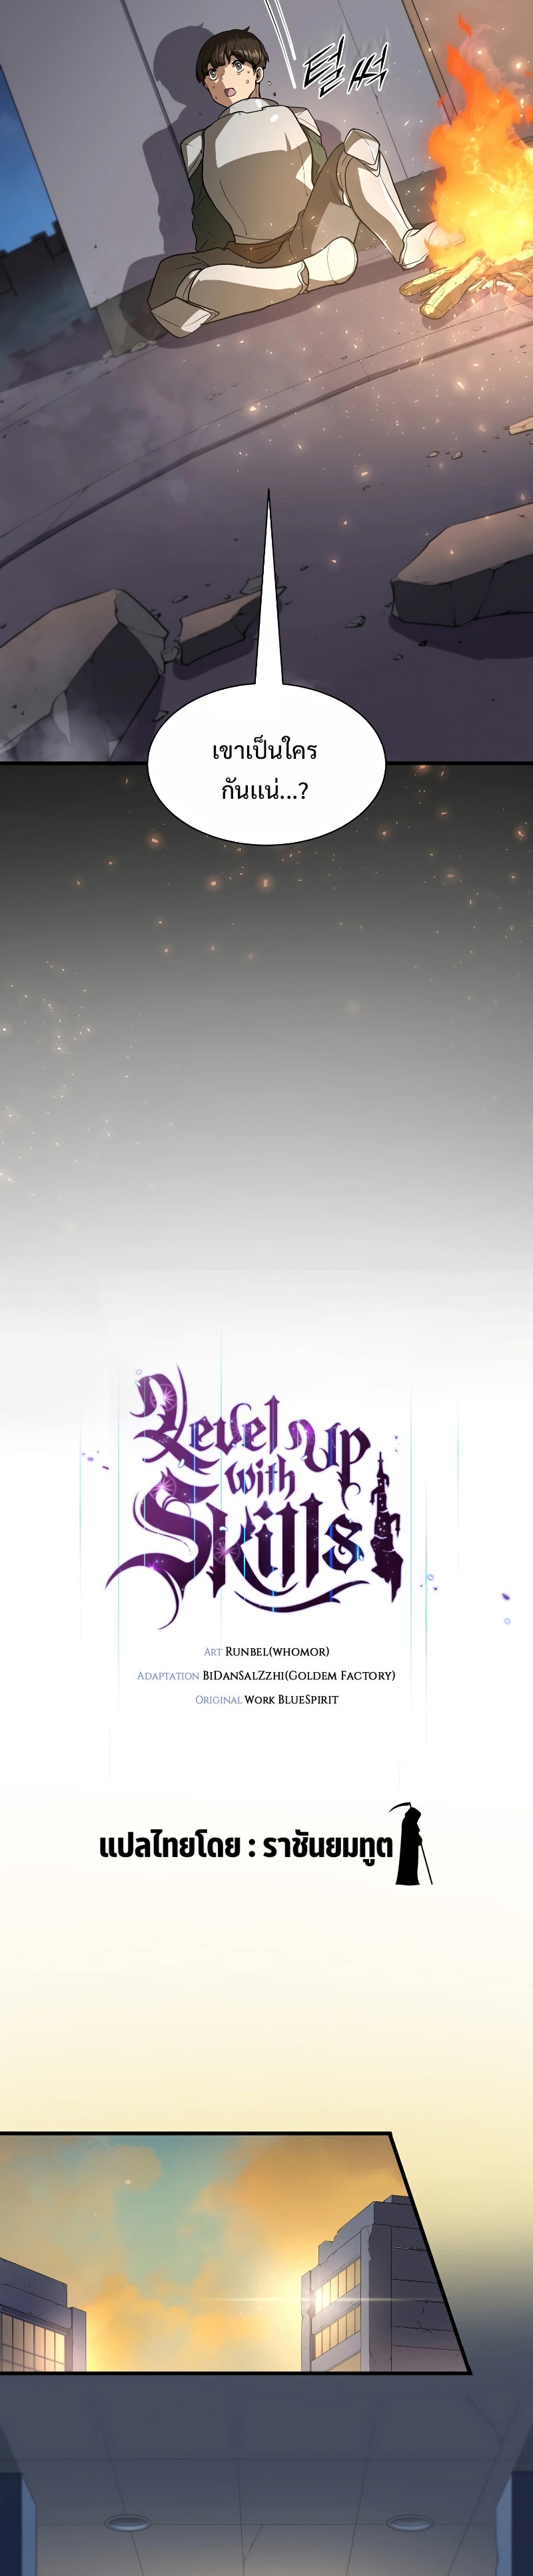 level up with skills 39.20